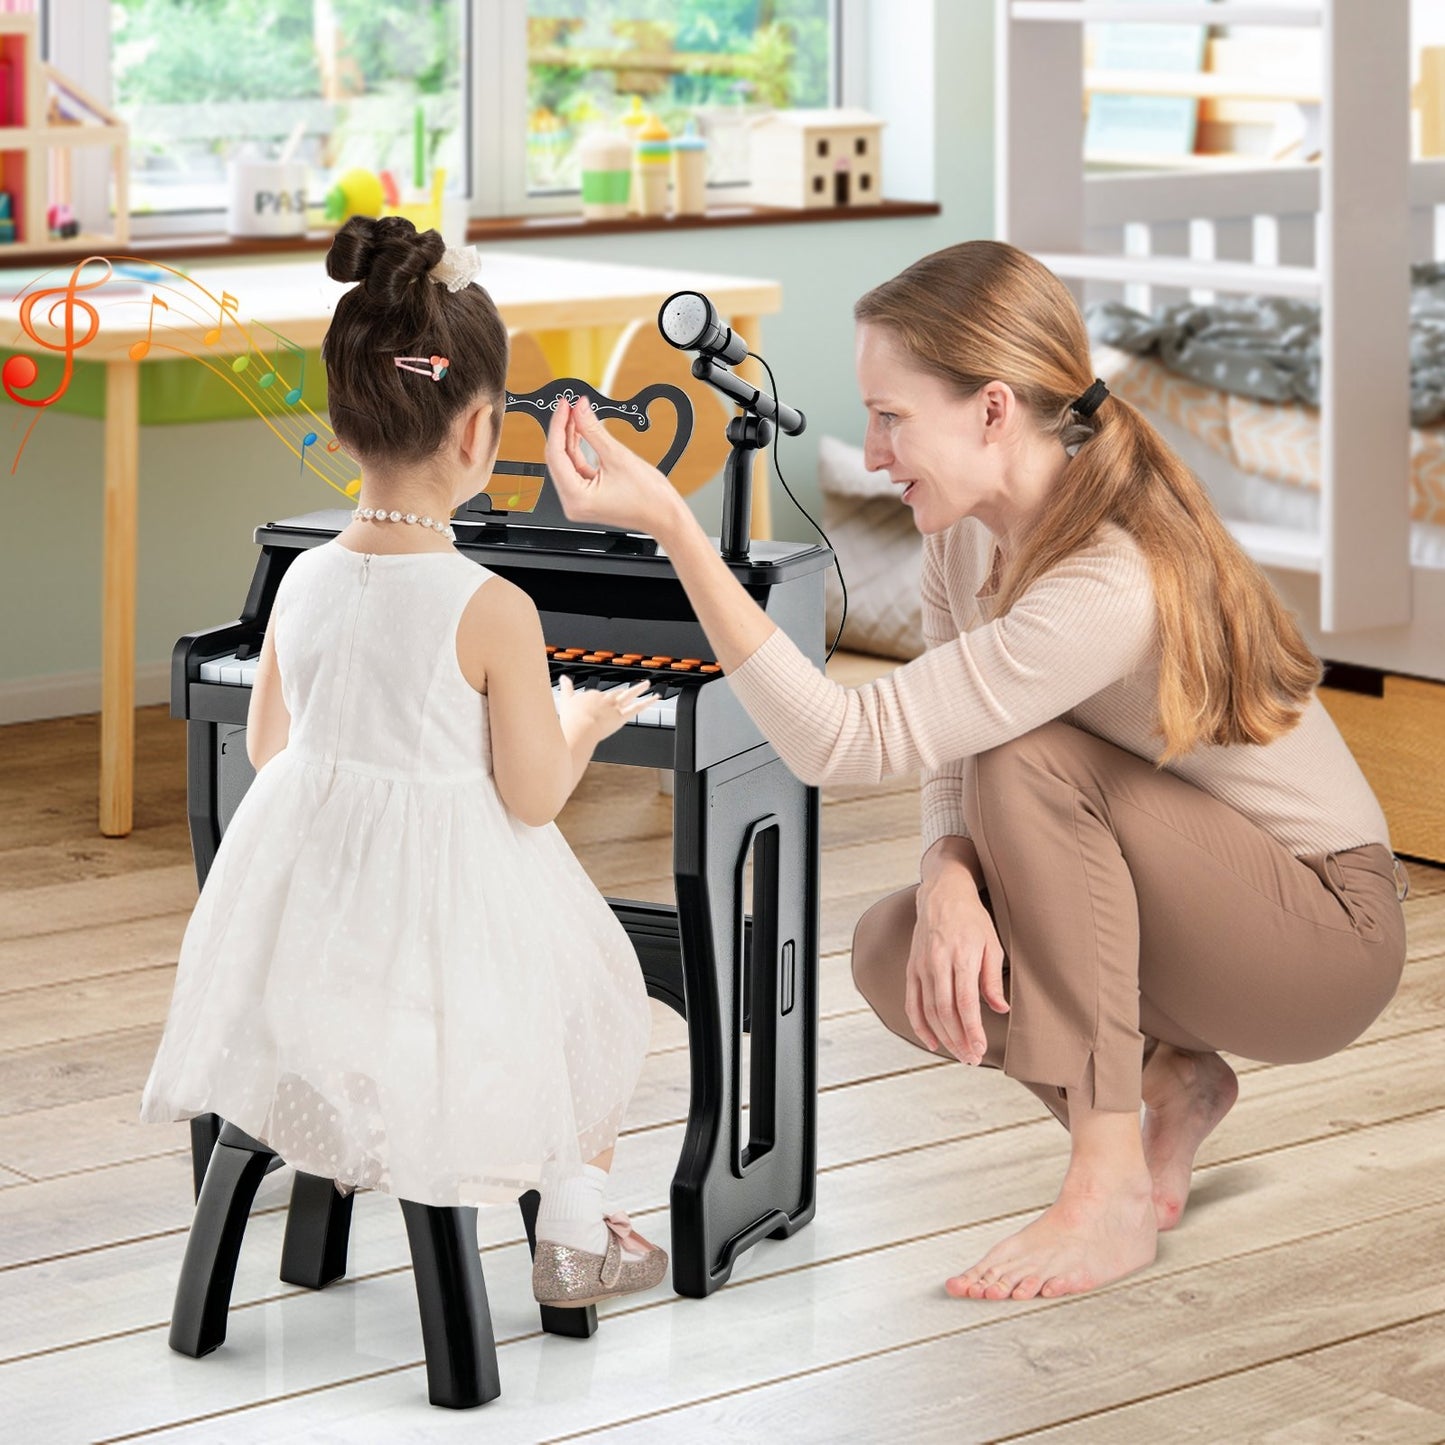 37 Keys Music Piano with Microphone Kids Piano Keyboard with Detachable Music Stand, Black